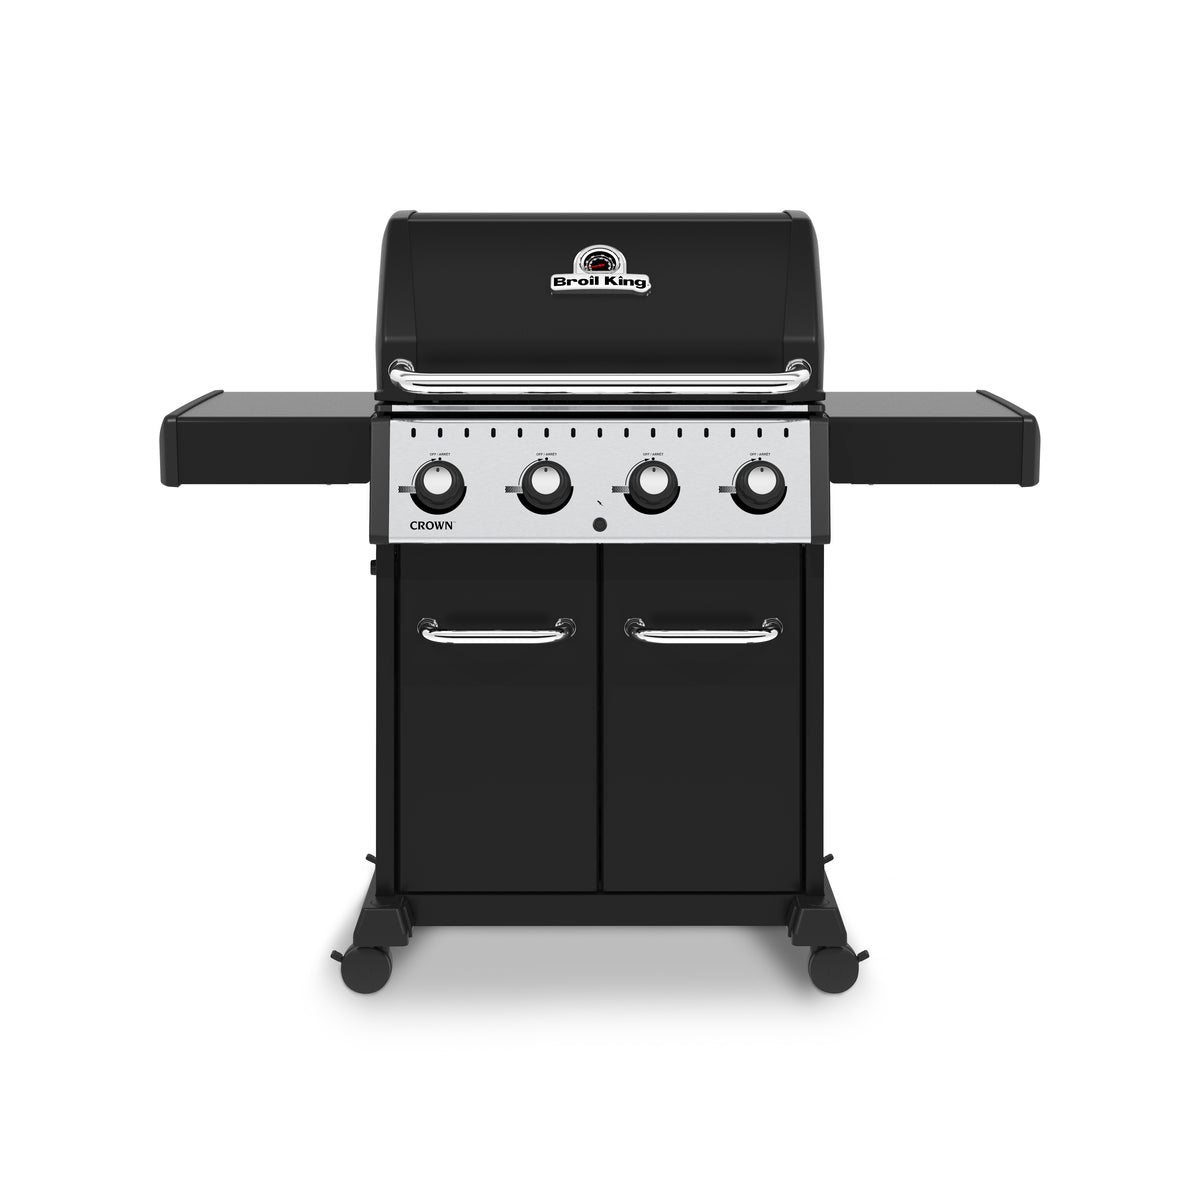 BroilKing Crown 420 grill: A sleek standalone grill with a white background, perfect for outdoor cooking and grilling enthusiasts